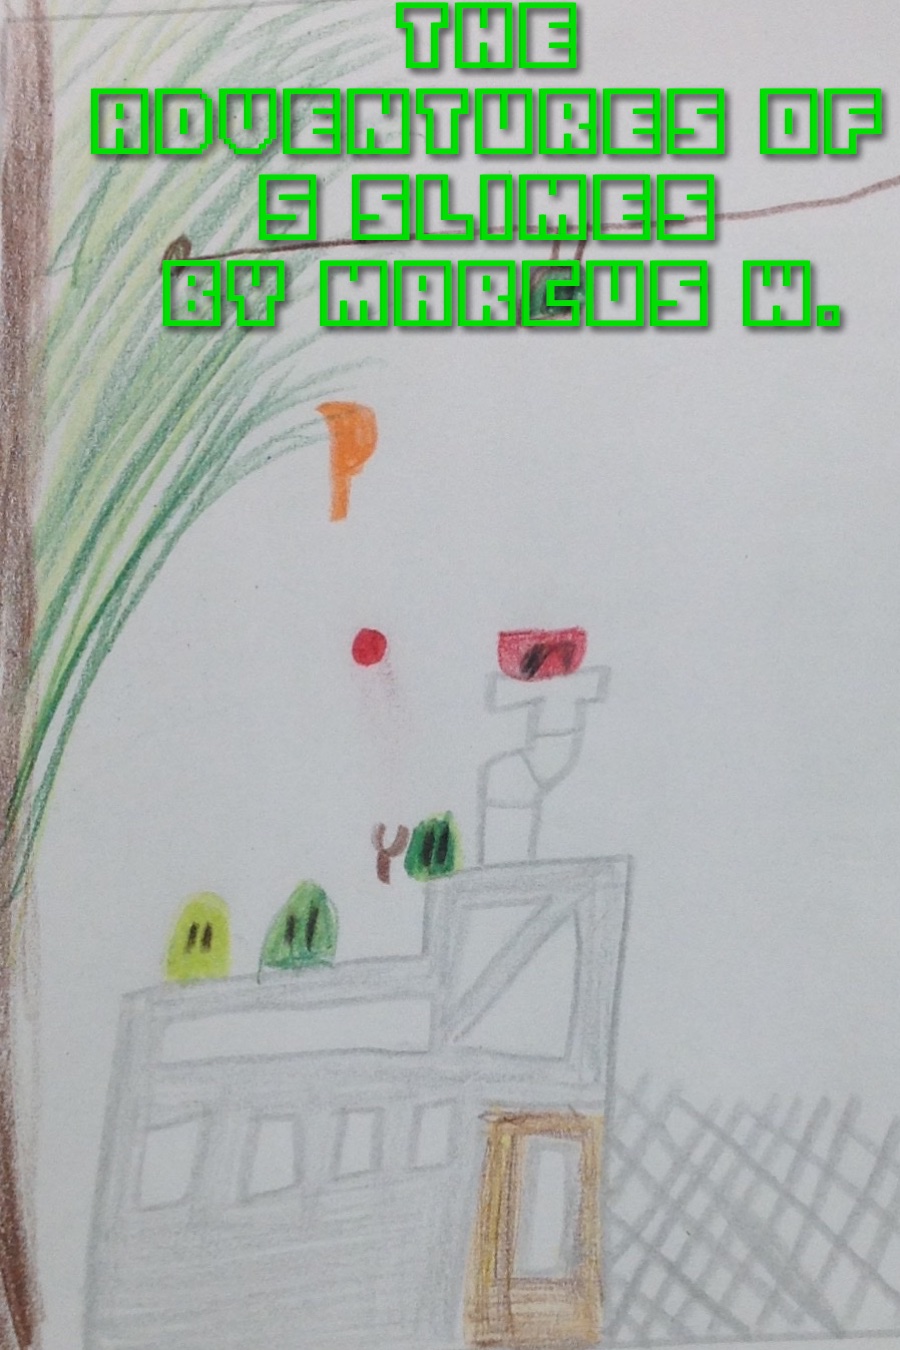 The Adventures of 5 Slimes by Marcus W